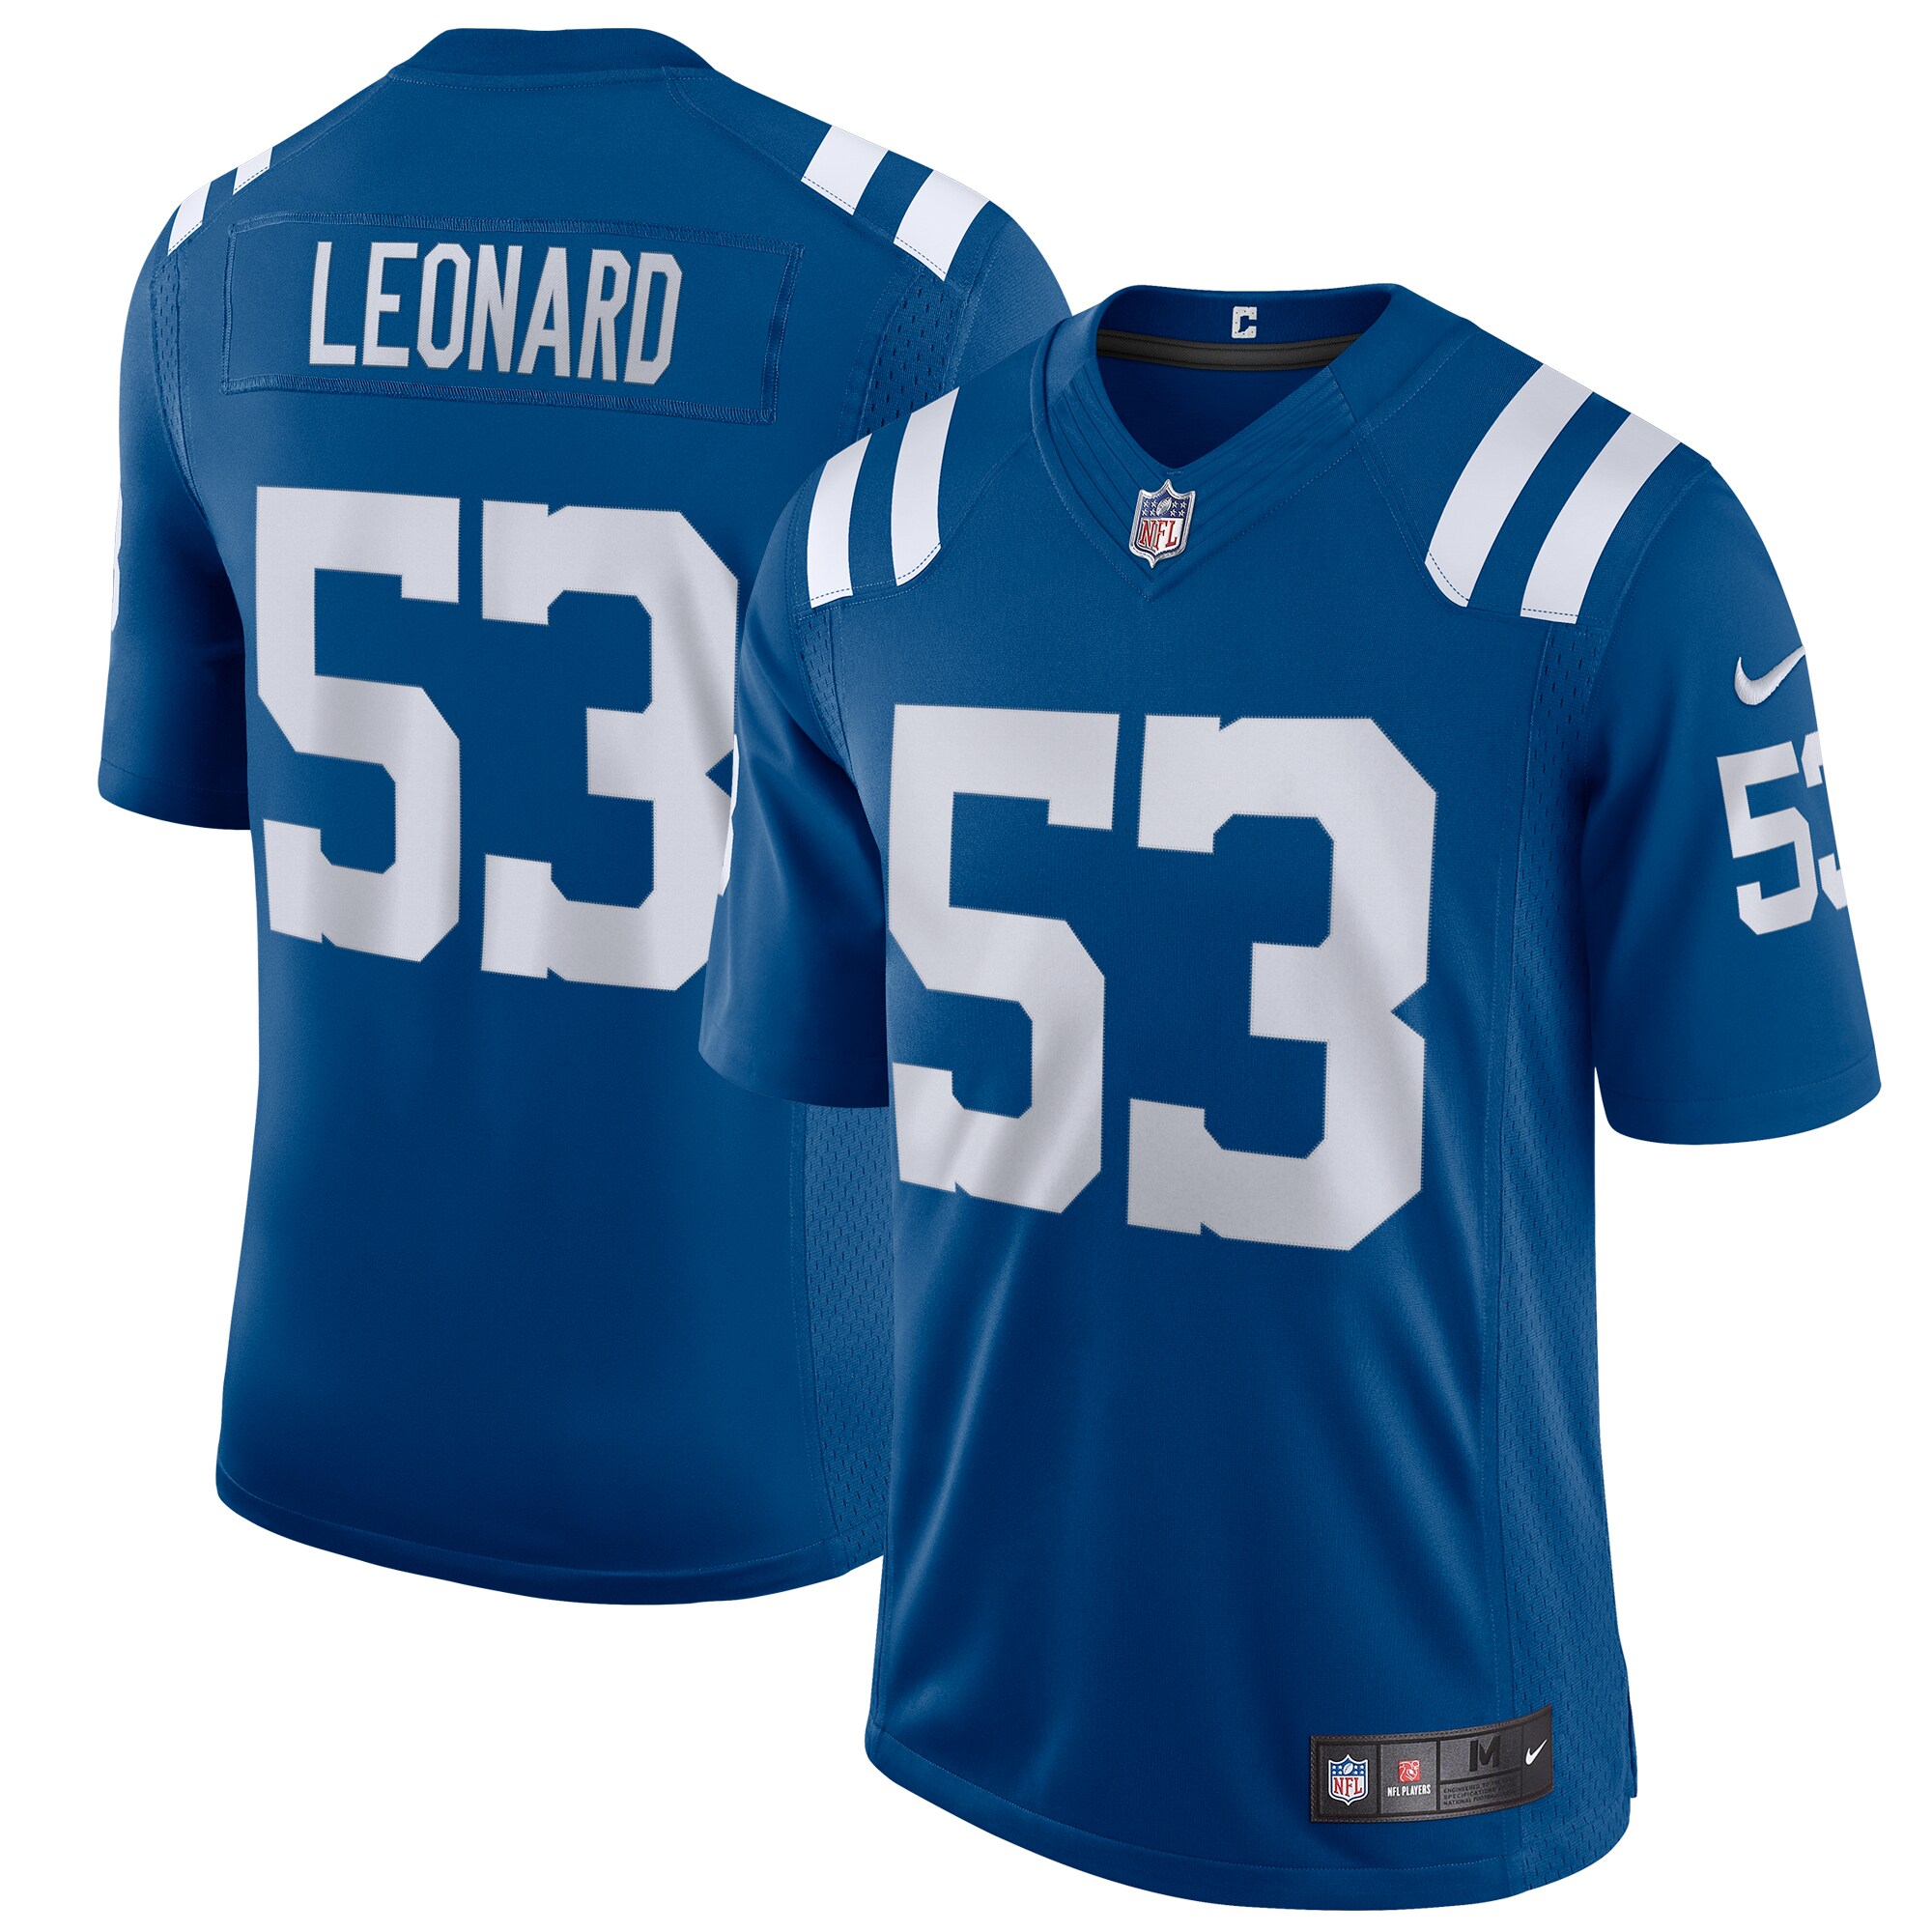 Men's Indianapolis Colts Jerseys Royal Shaquille Leonard Vapor Limited Style